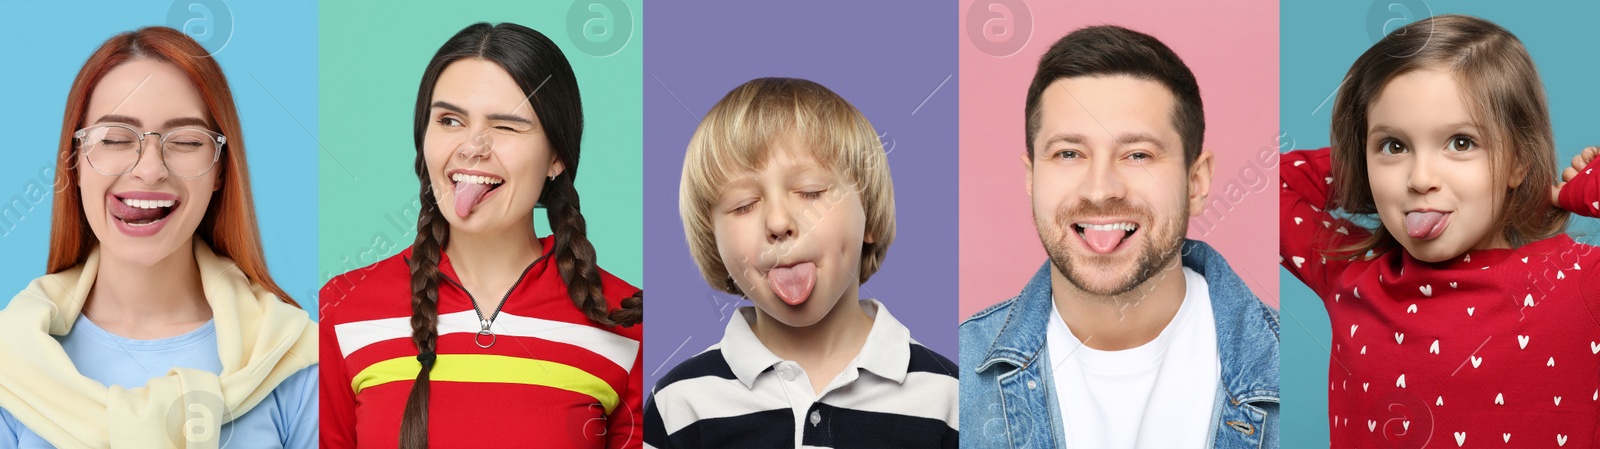 Image of Collage with photos of adults and children showing their tongues on different color backgrounds